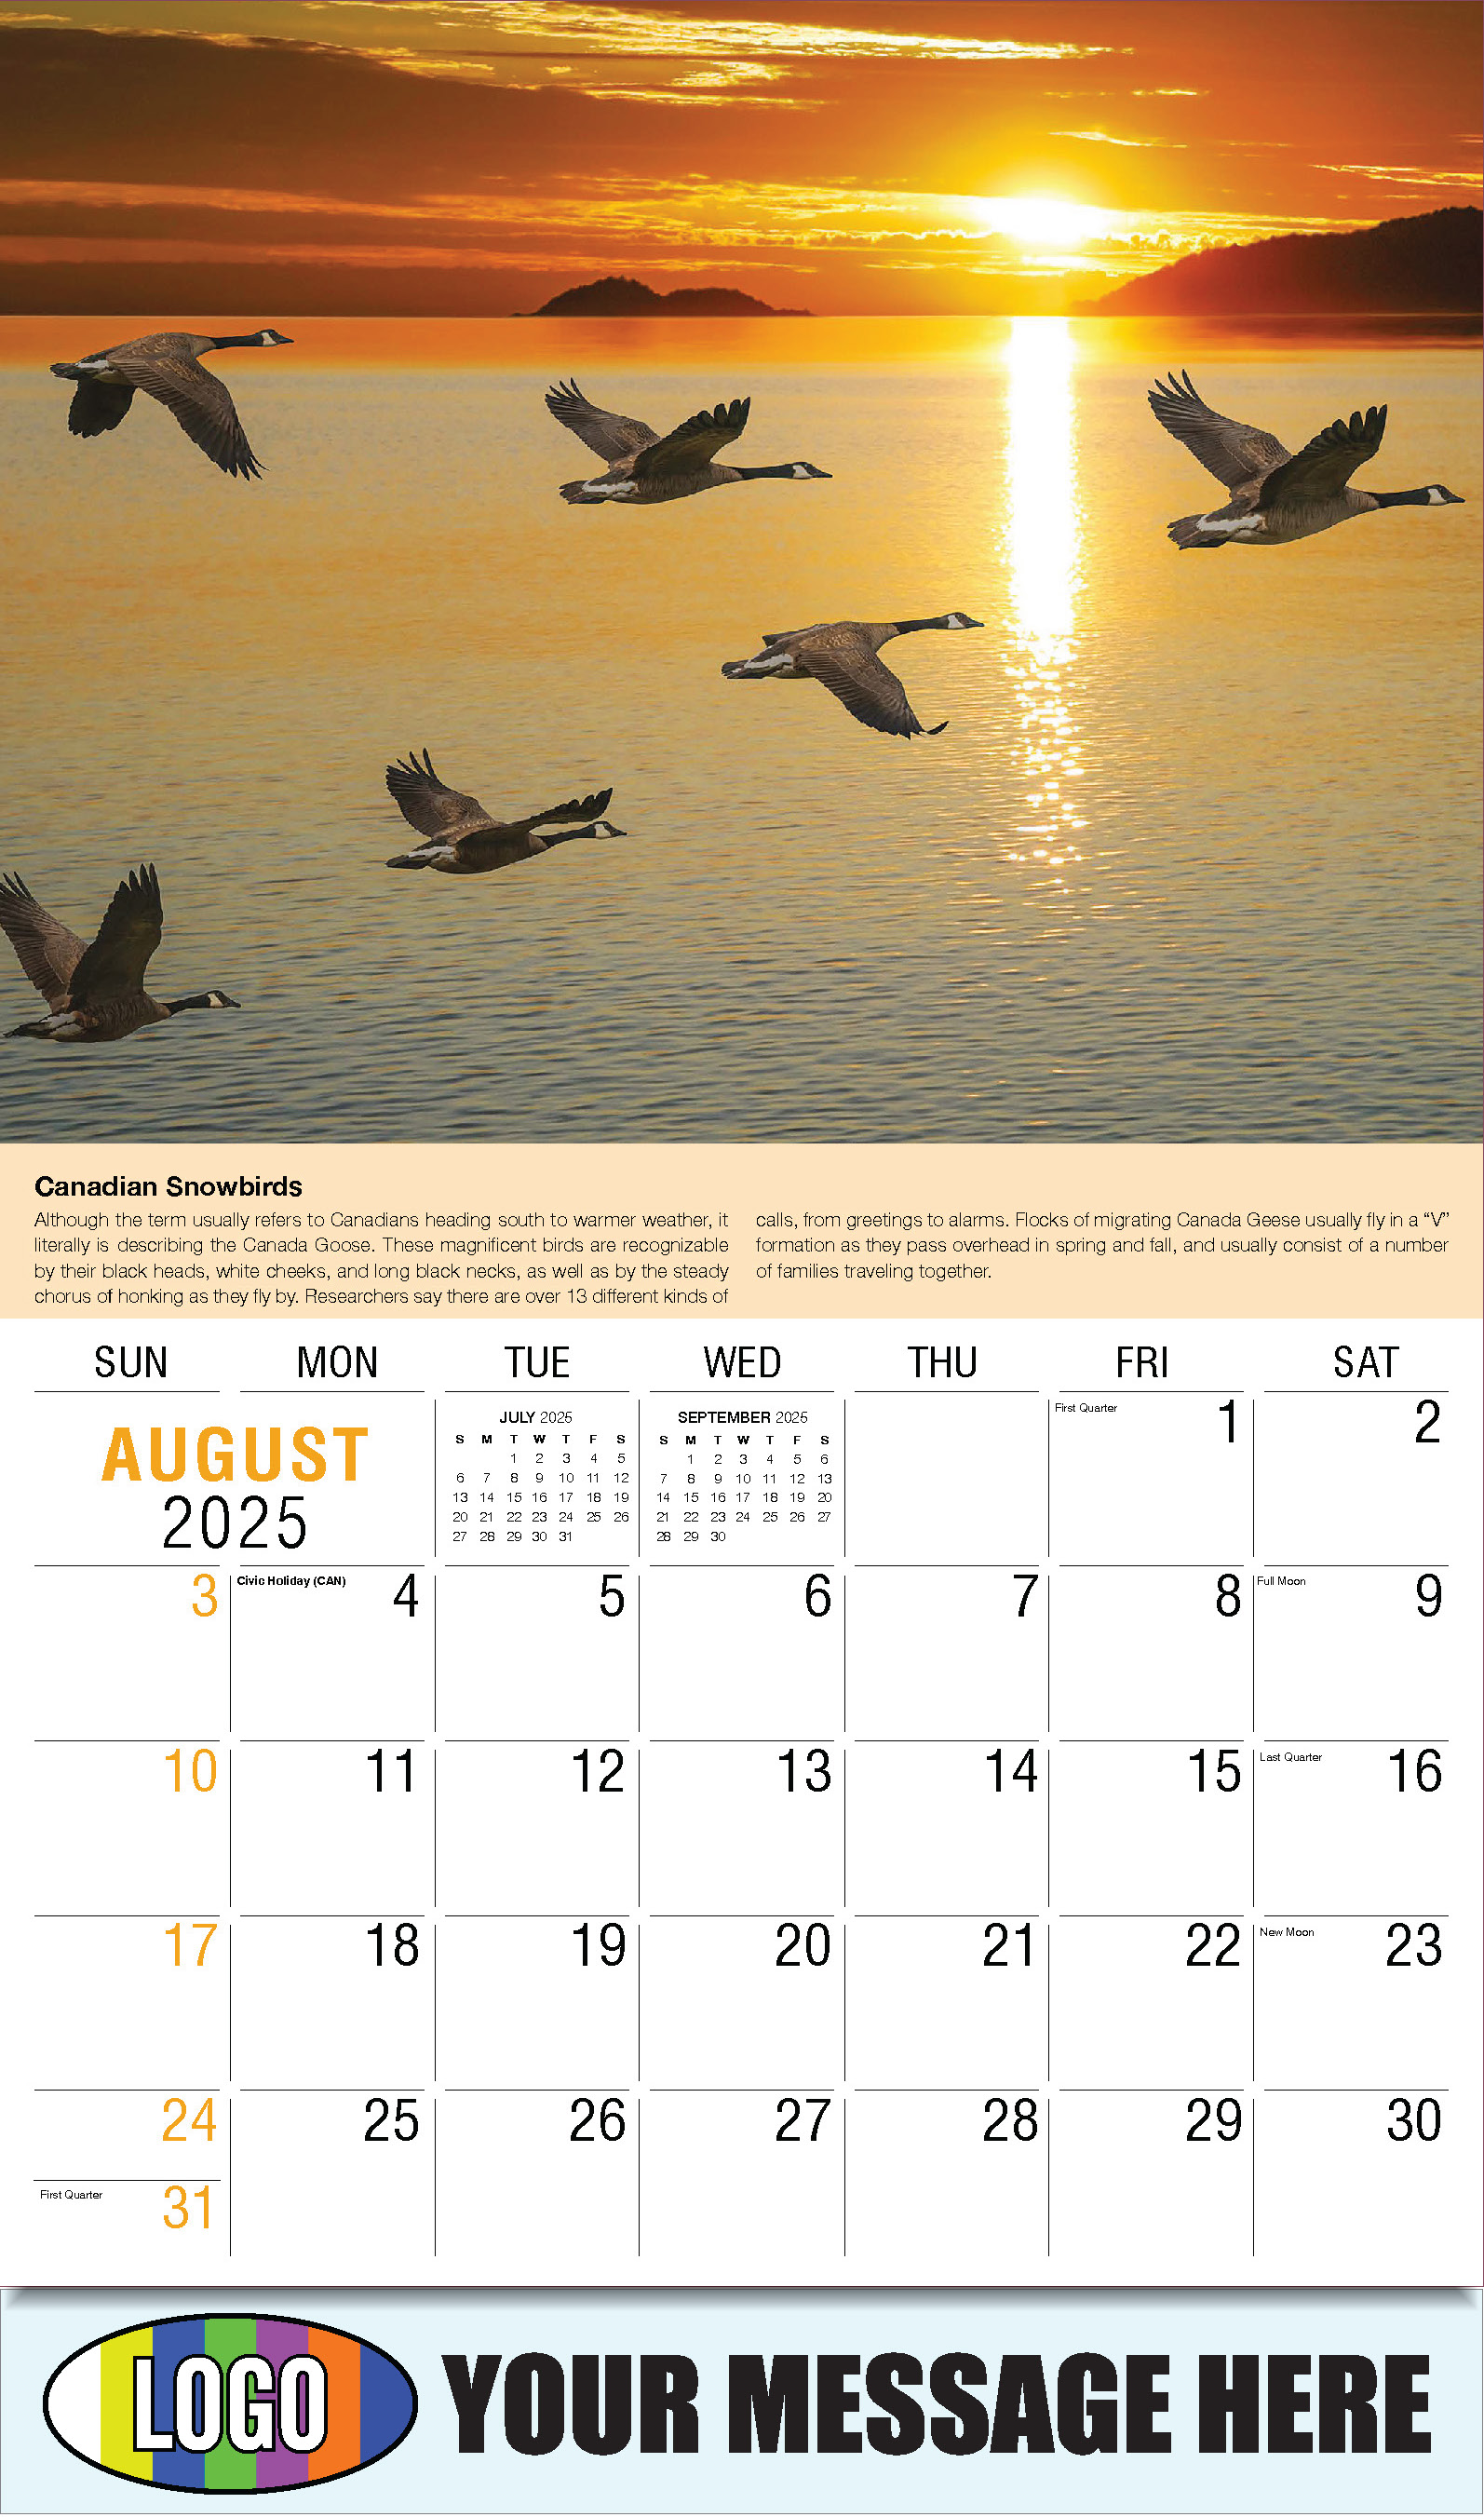 Planet Earth 2025 Business Promotional Wall Calendar - August